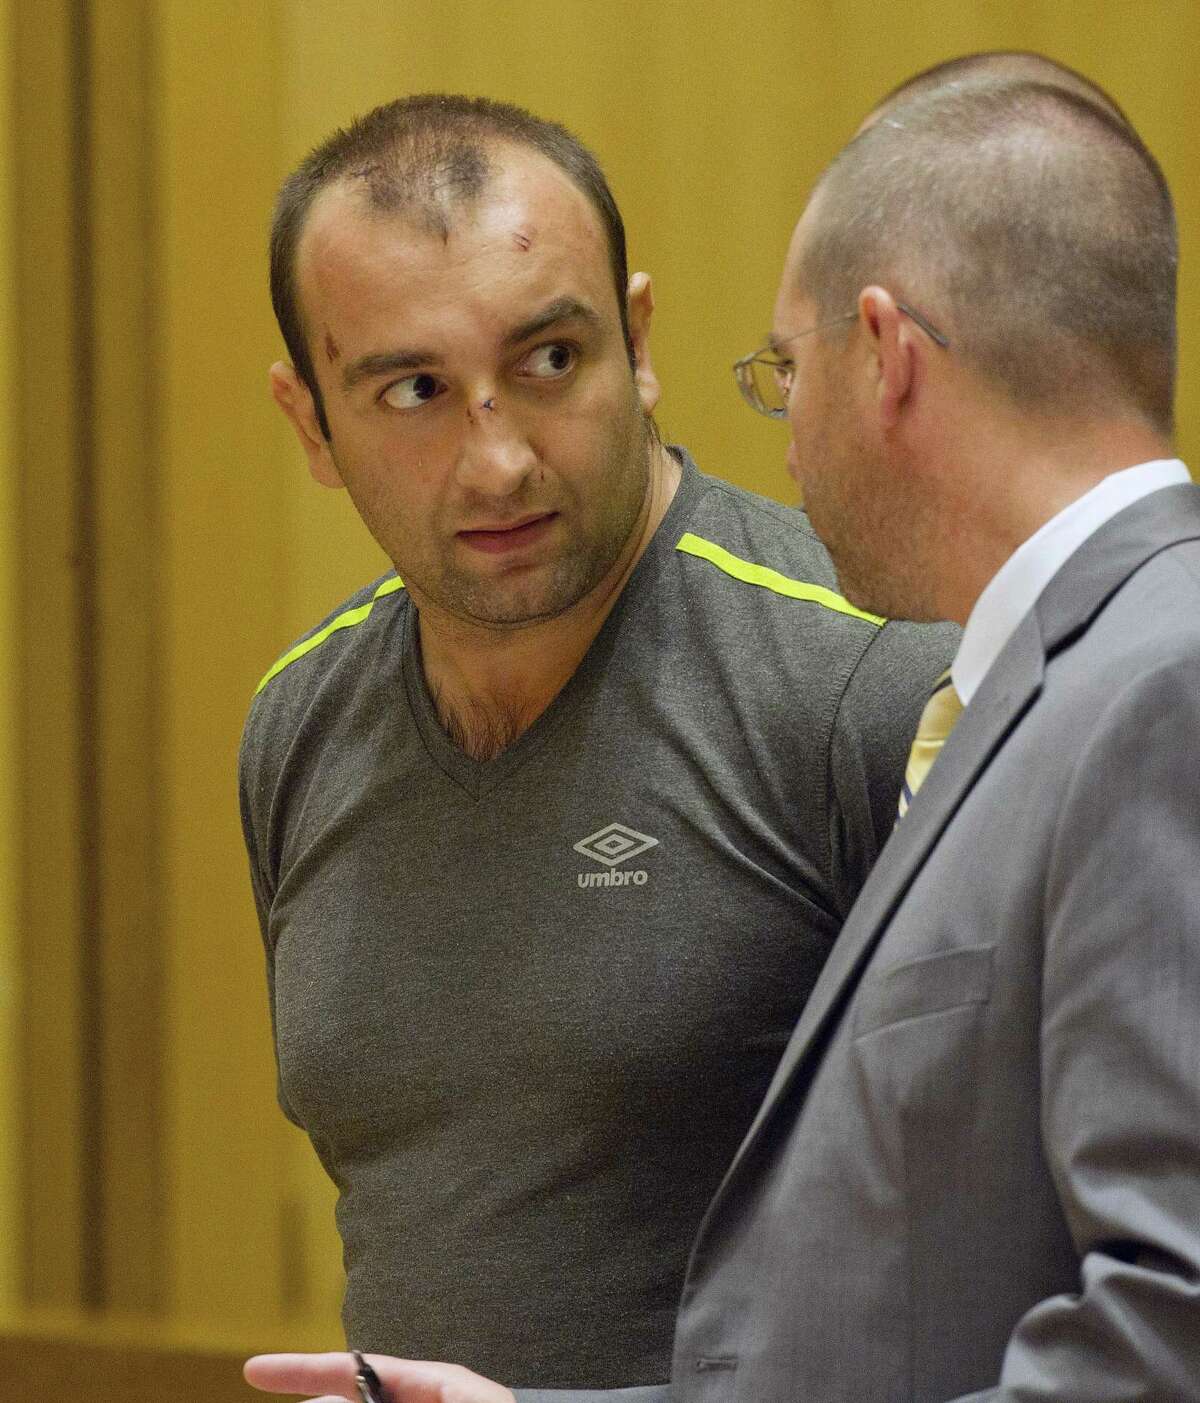 Shota Mekoshvili, with his former attorney Lindy Urso in State Superior Court in Stamford, Conn., on Friday, August 29, 2014. Mekoshvili is accused of murdering Mohammed Kamal, the Stamford Taxi driver found stabbed to death near his cab on Doolittle Road.